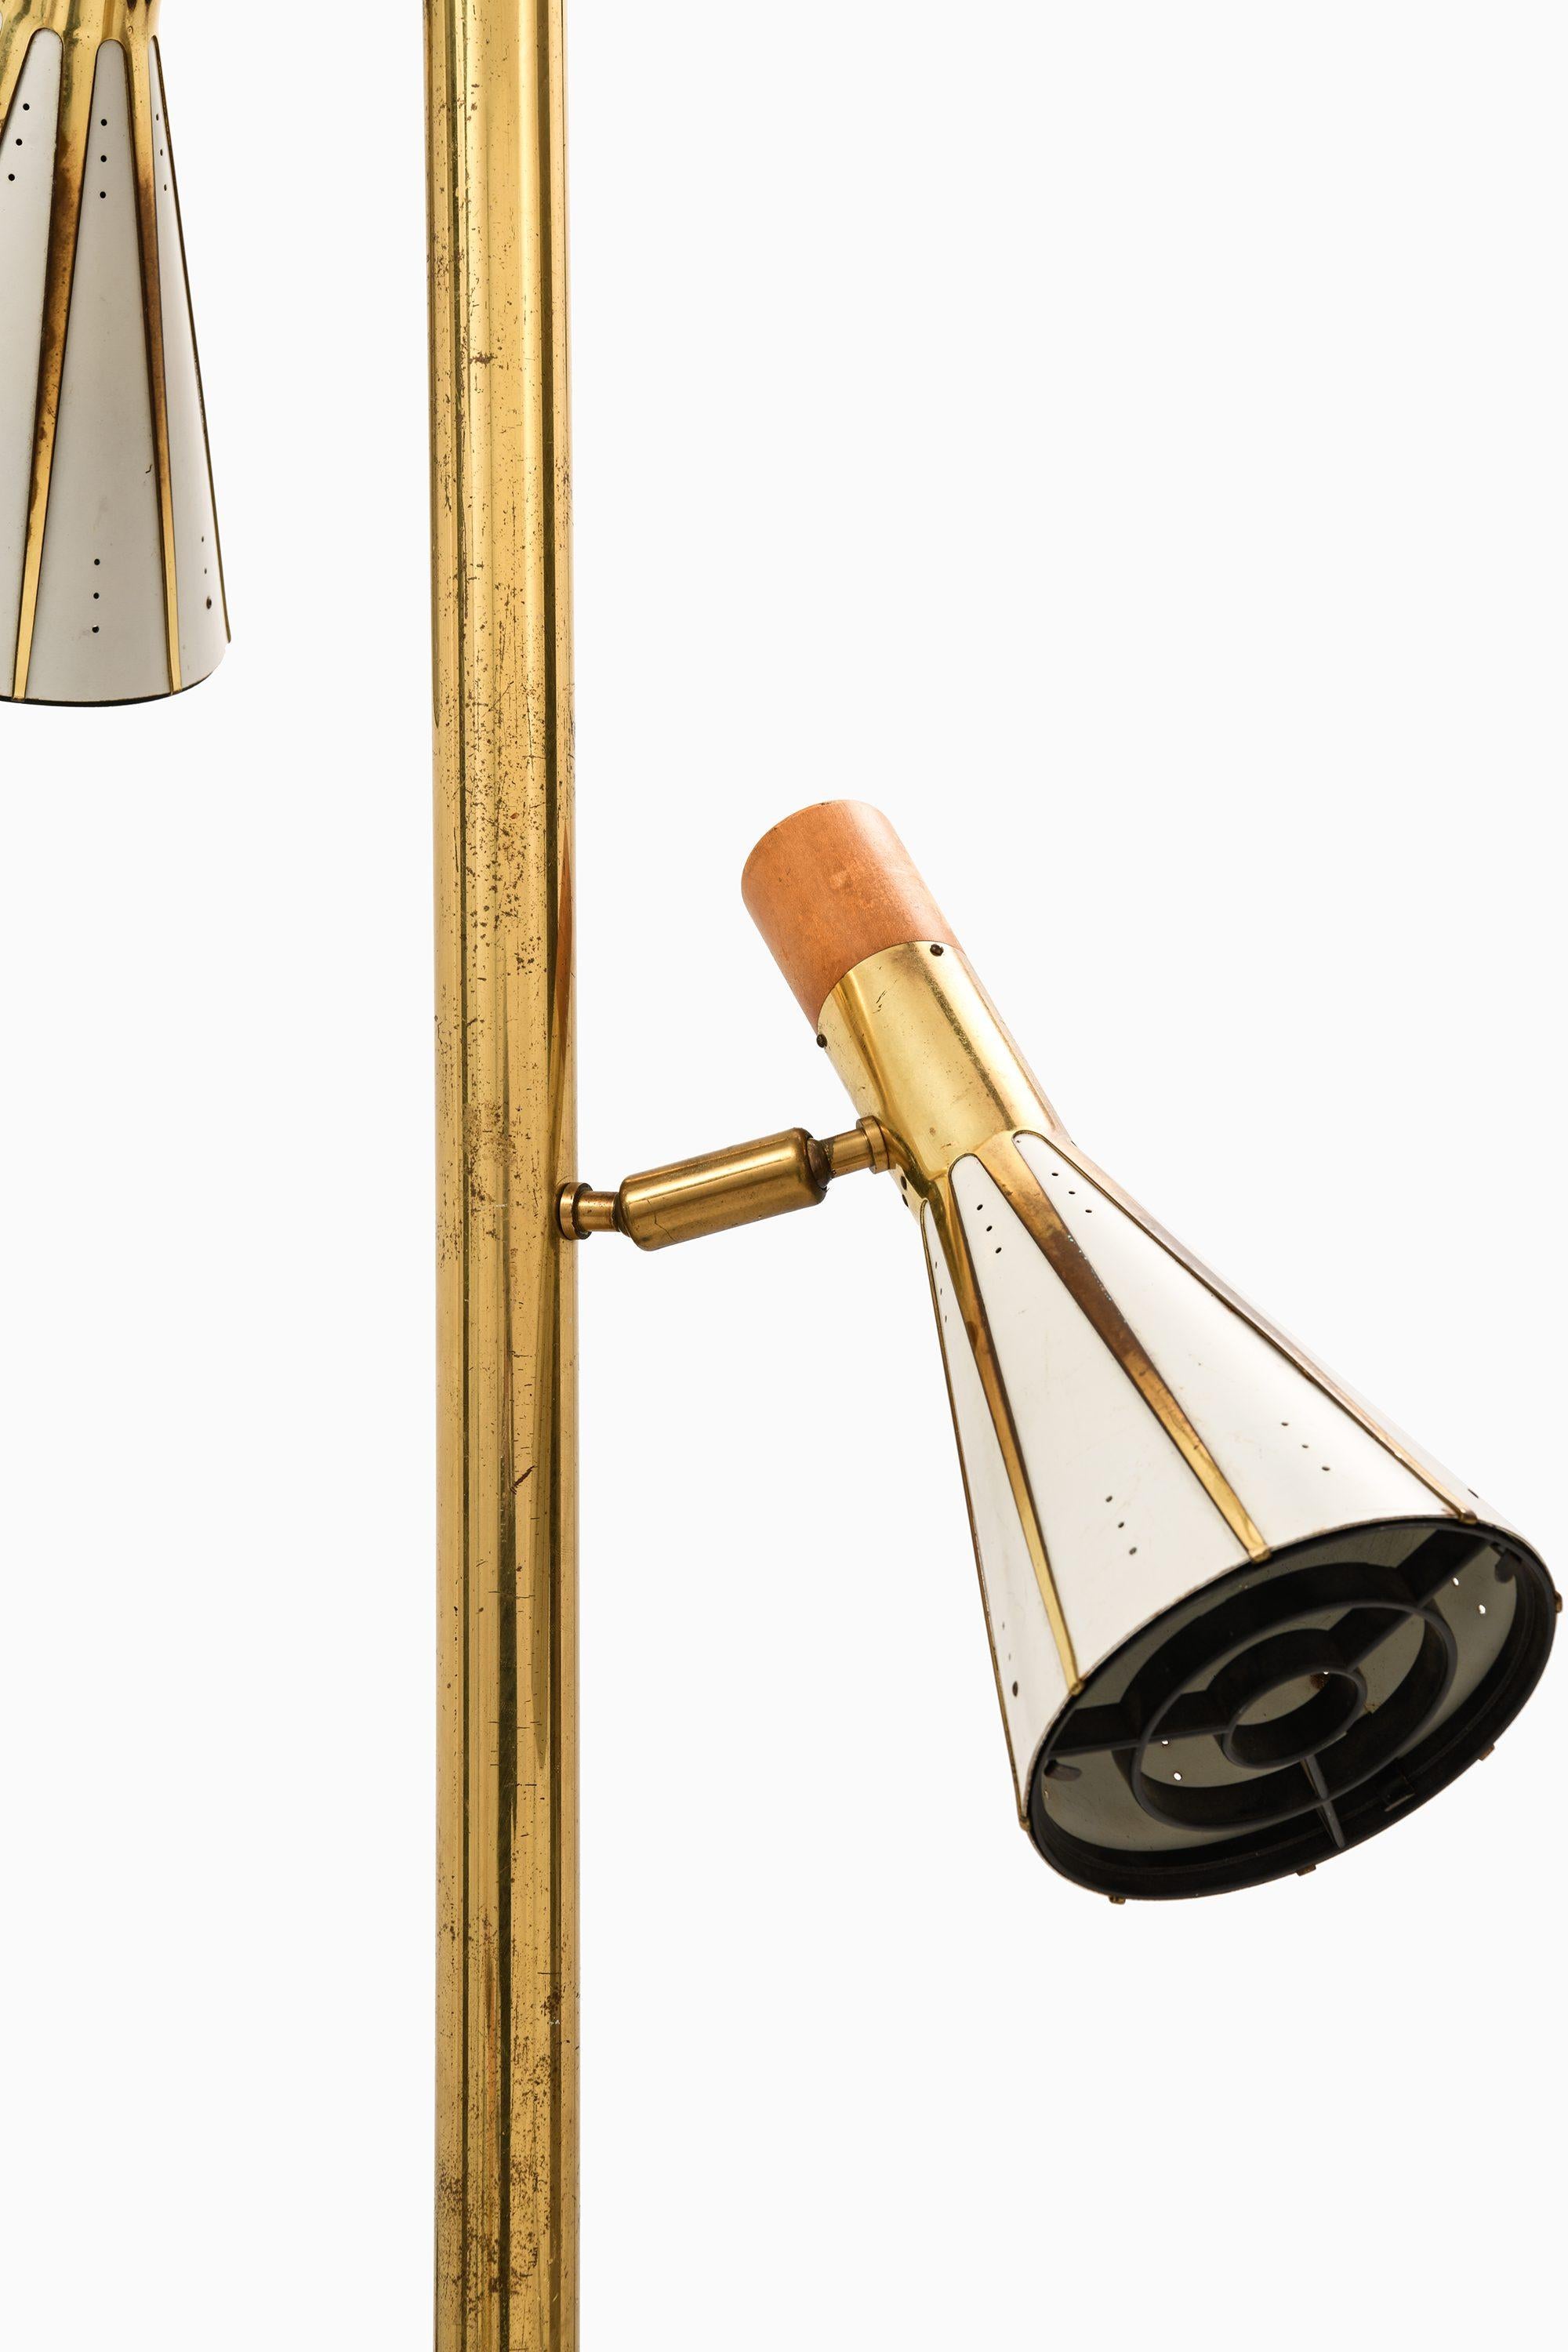 American Rare Floor / Pole Lamp in Brass and White Lacquered Metal, 1960’s For Sale